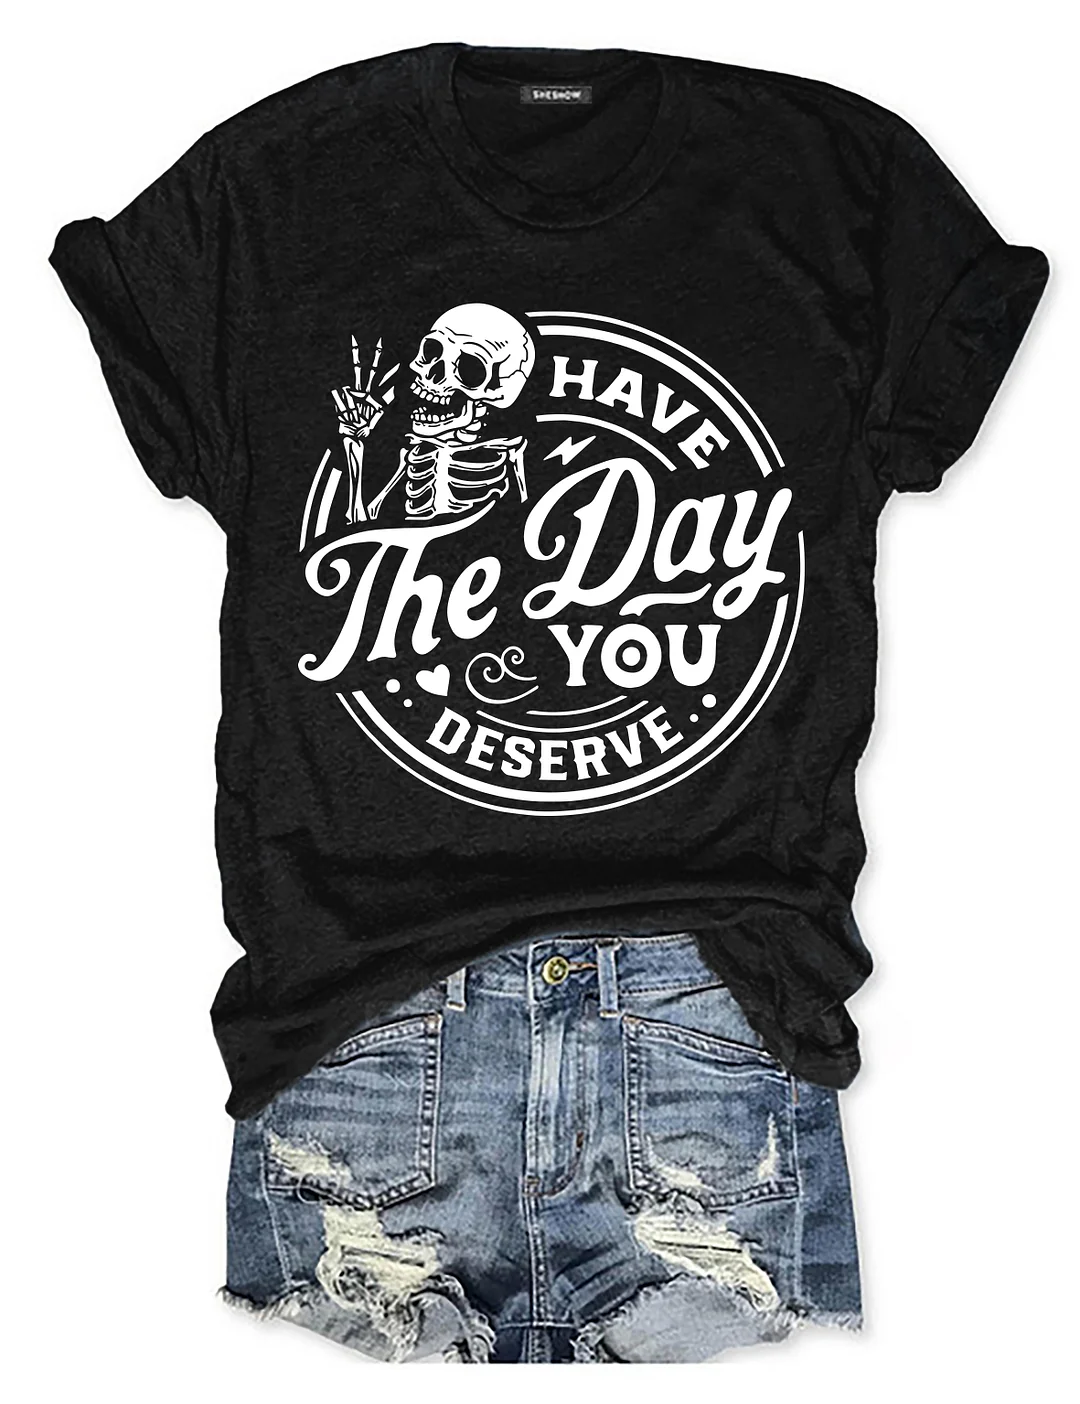 Have the day you deserve T-shirt